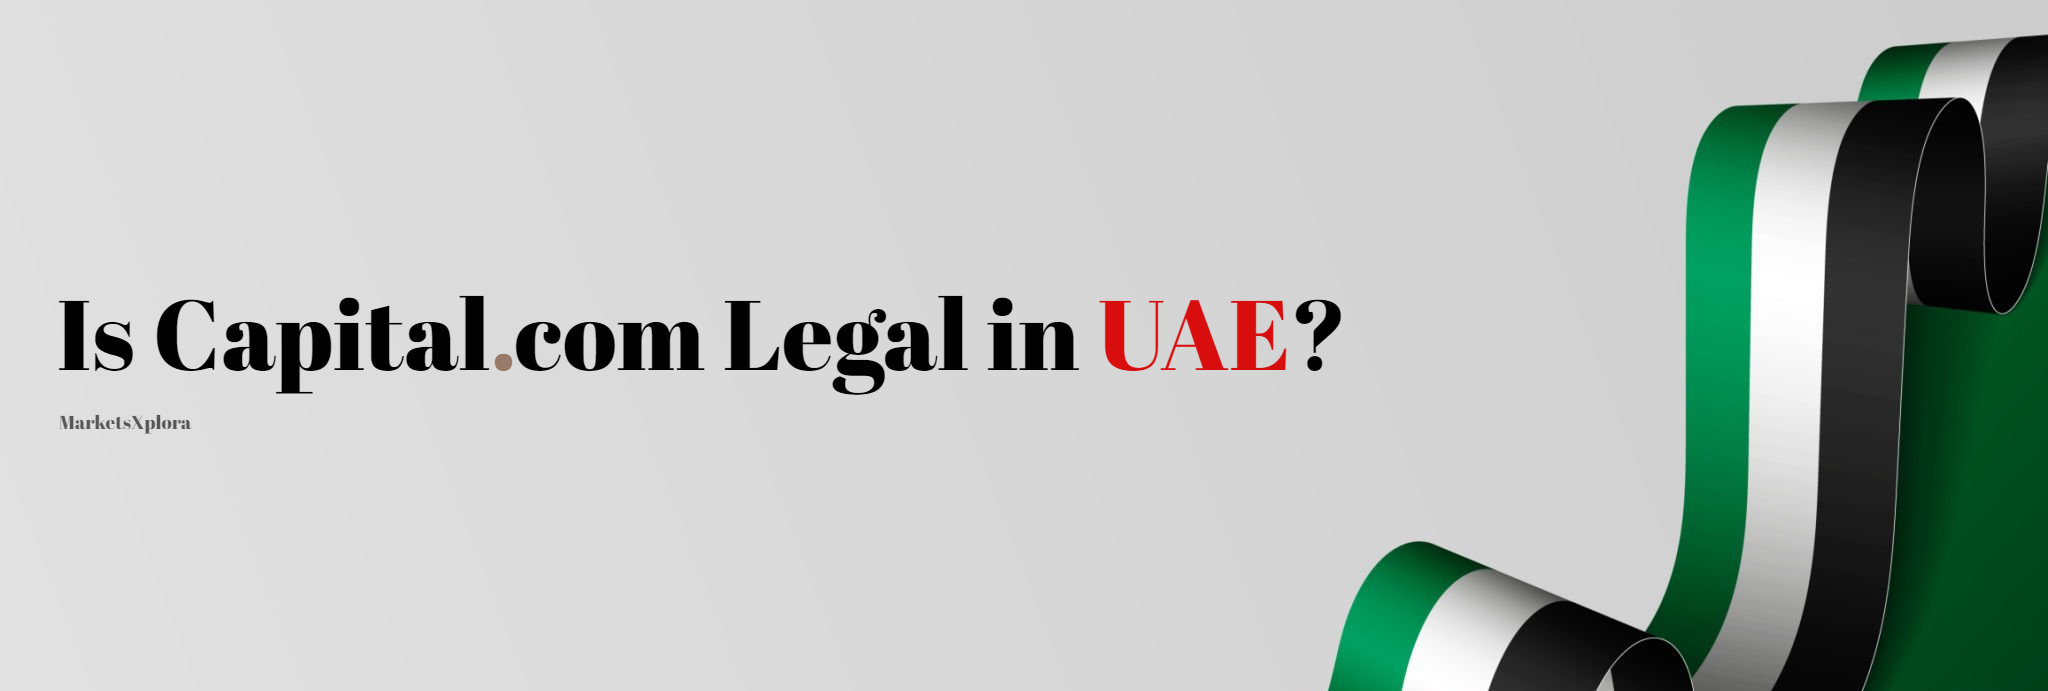 Is Capital.com legit in UAE? Discover the truth about this broker's licensing, compliance and legitimacy in our in-depth review.